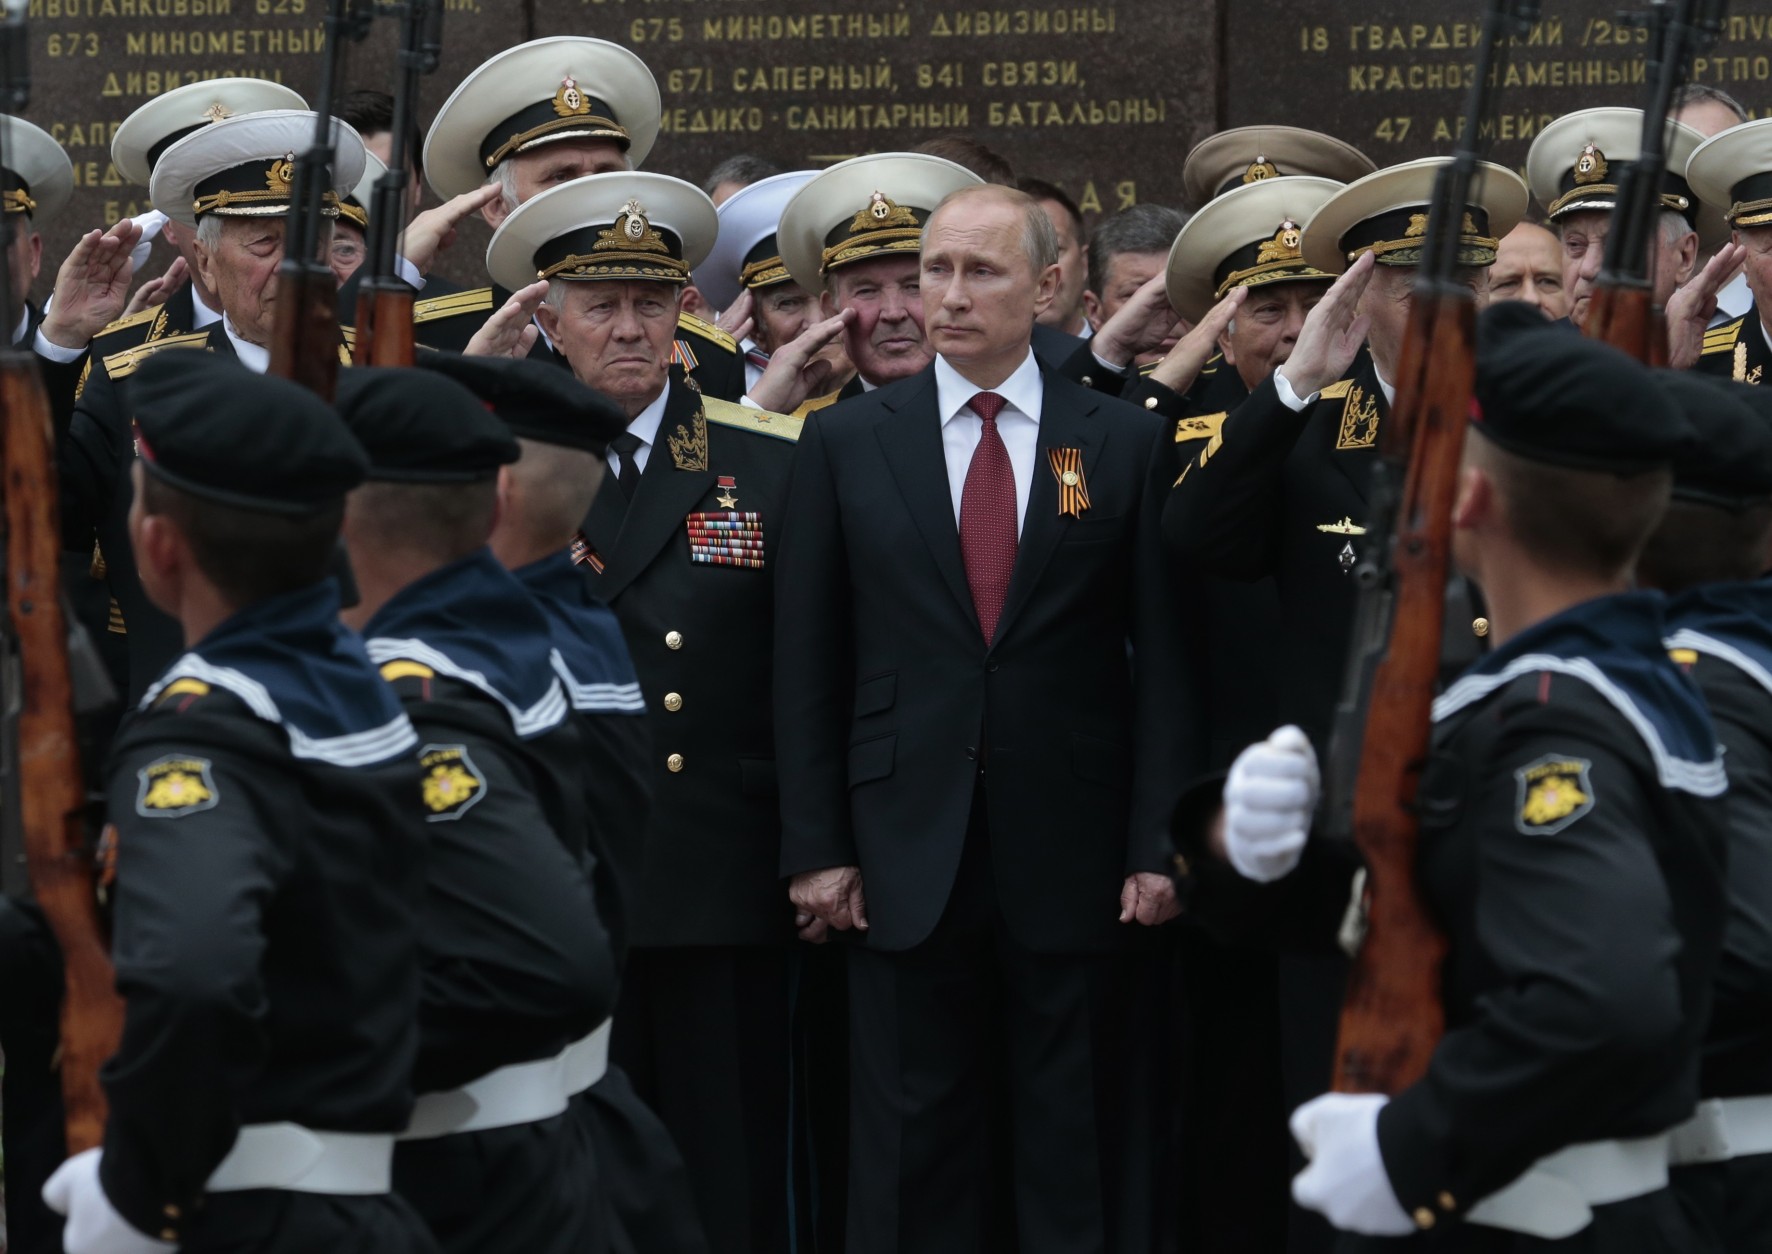 FOR USE AS DESIRED, YEAR END PHOTOS - FILE - Russian President Vladimir Putin attends a  parade marking the Victory Day in Sevastopol, Crimea, Friday, May 9, 2014. Putin extolled the return of Crimea to Russia before tens of thousands during his first trip to Black Sea peninsula since its annexation. The triumphant visit was quickly condemned by Ukraine and NATO.  (AP Photo / Ivan Sekretarev, File)